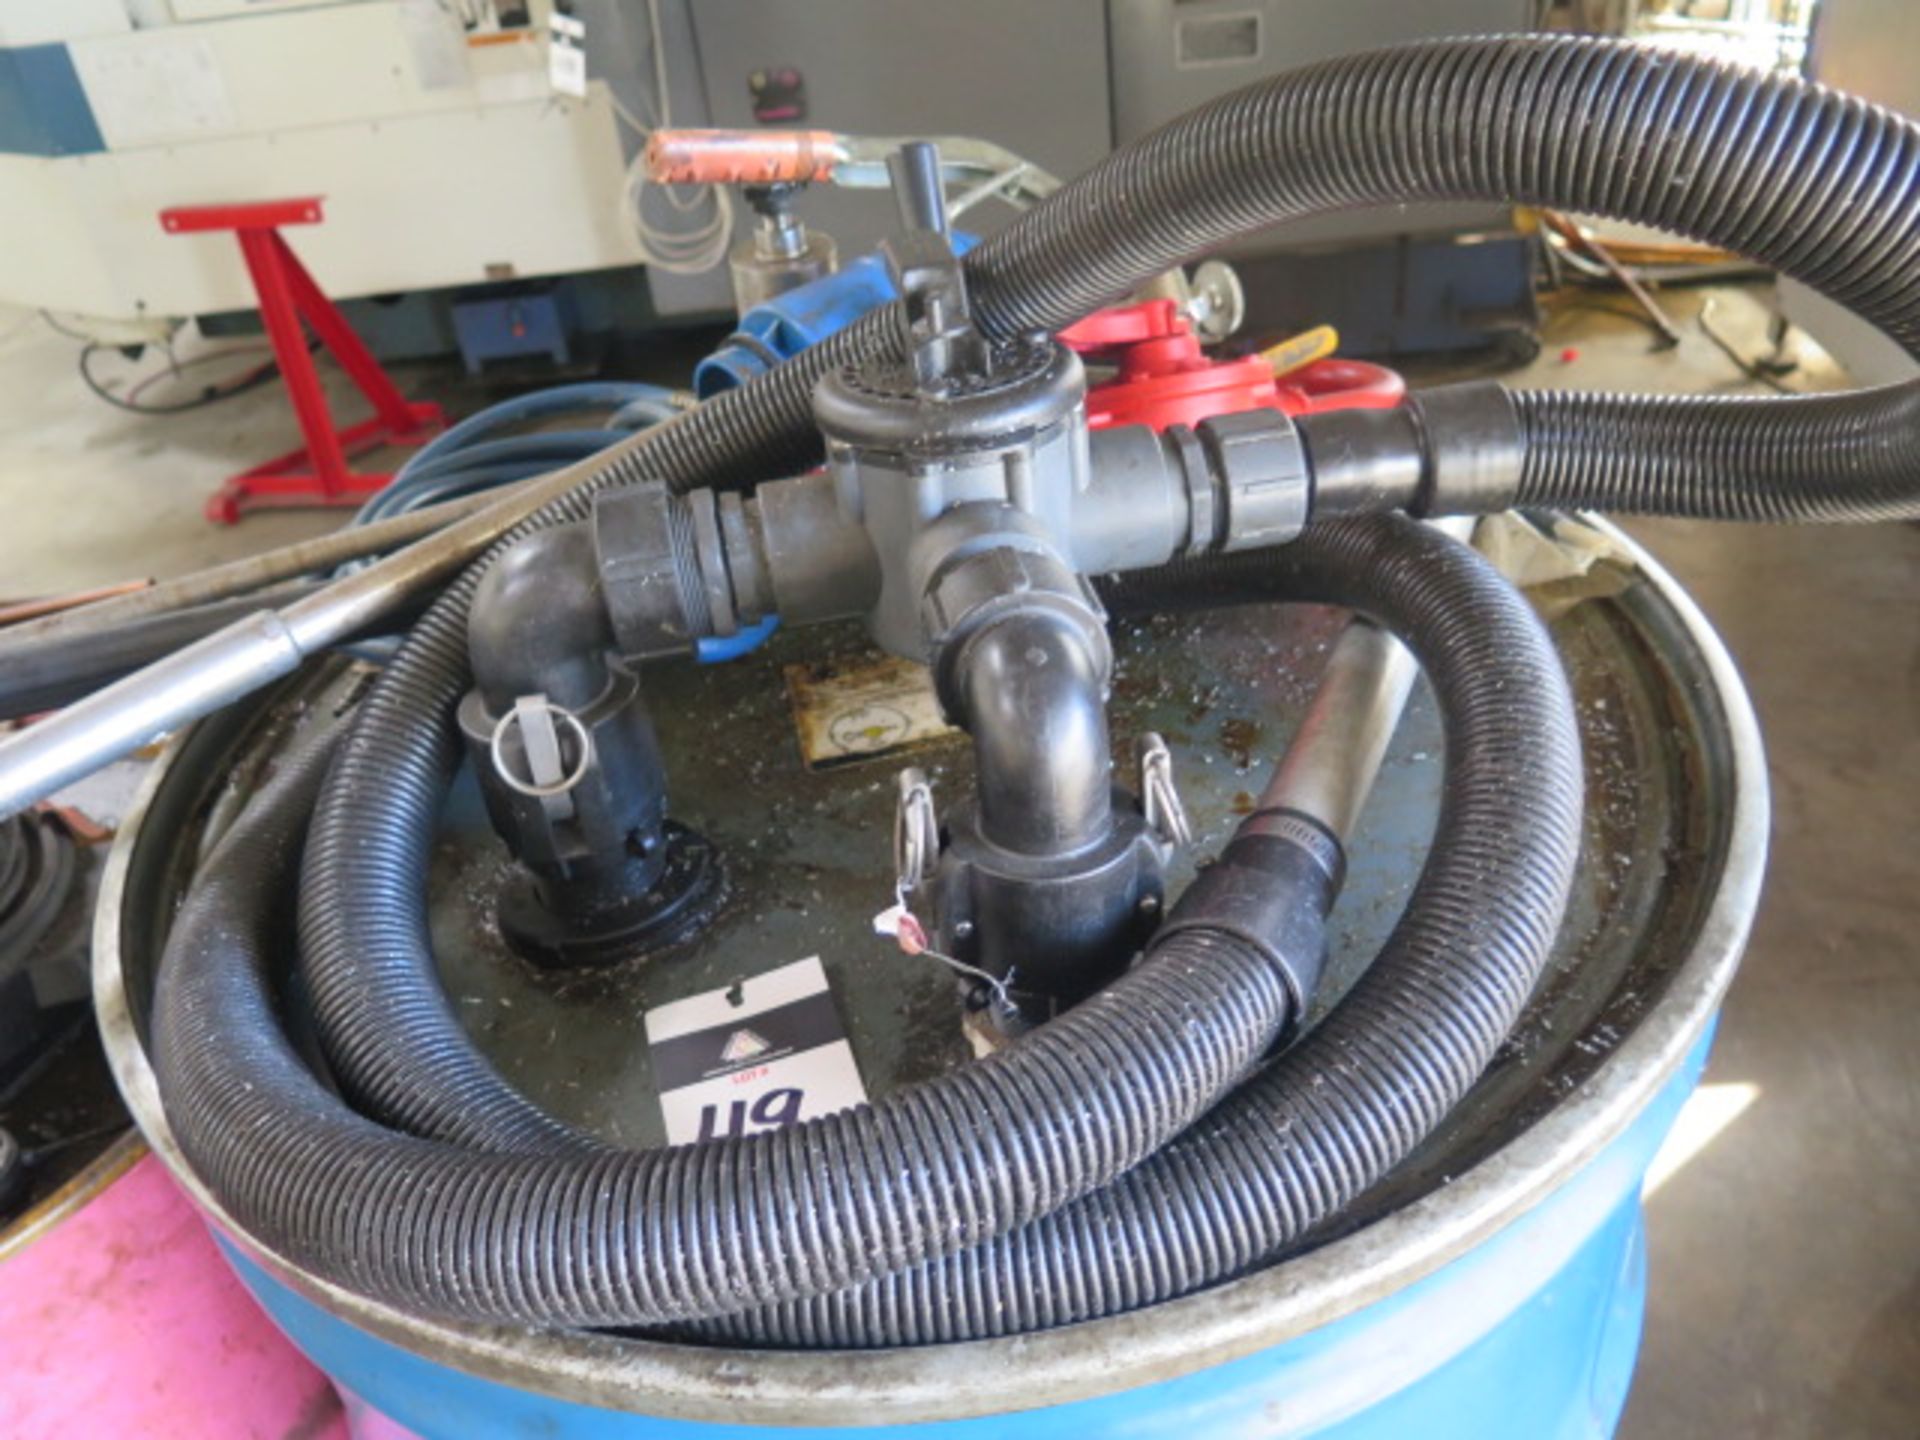 Exair Vacuum Coolant Recovery System and Barrel Style Shop Vac - Image 2 of 2